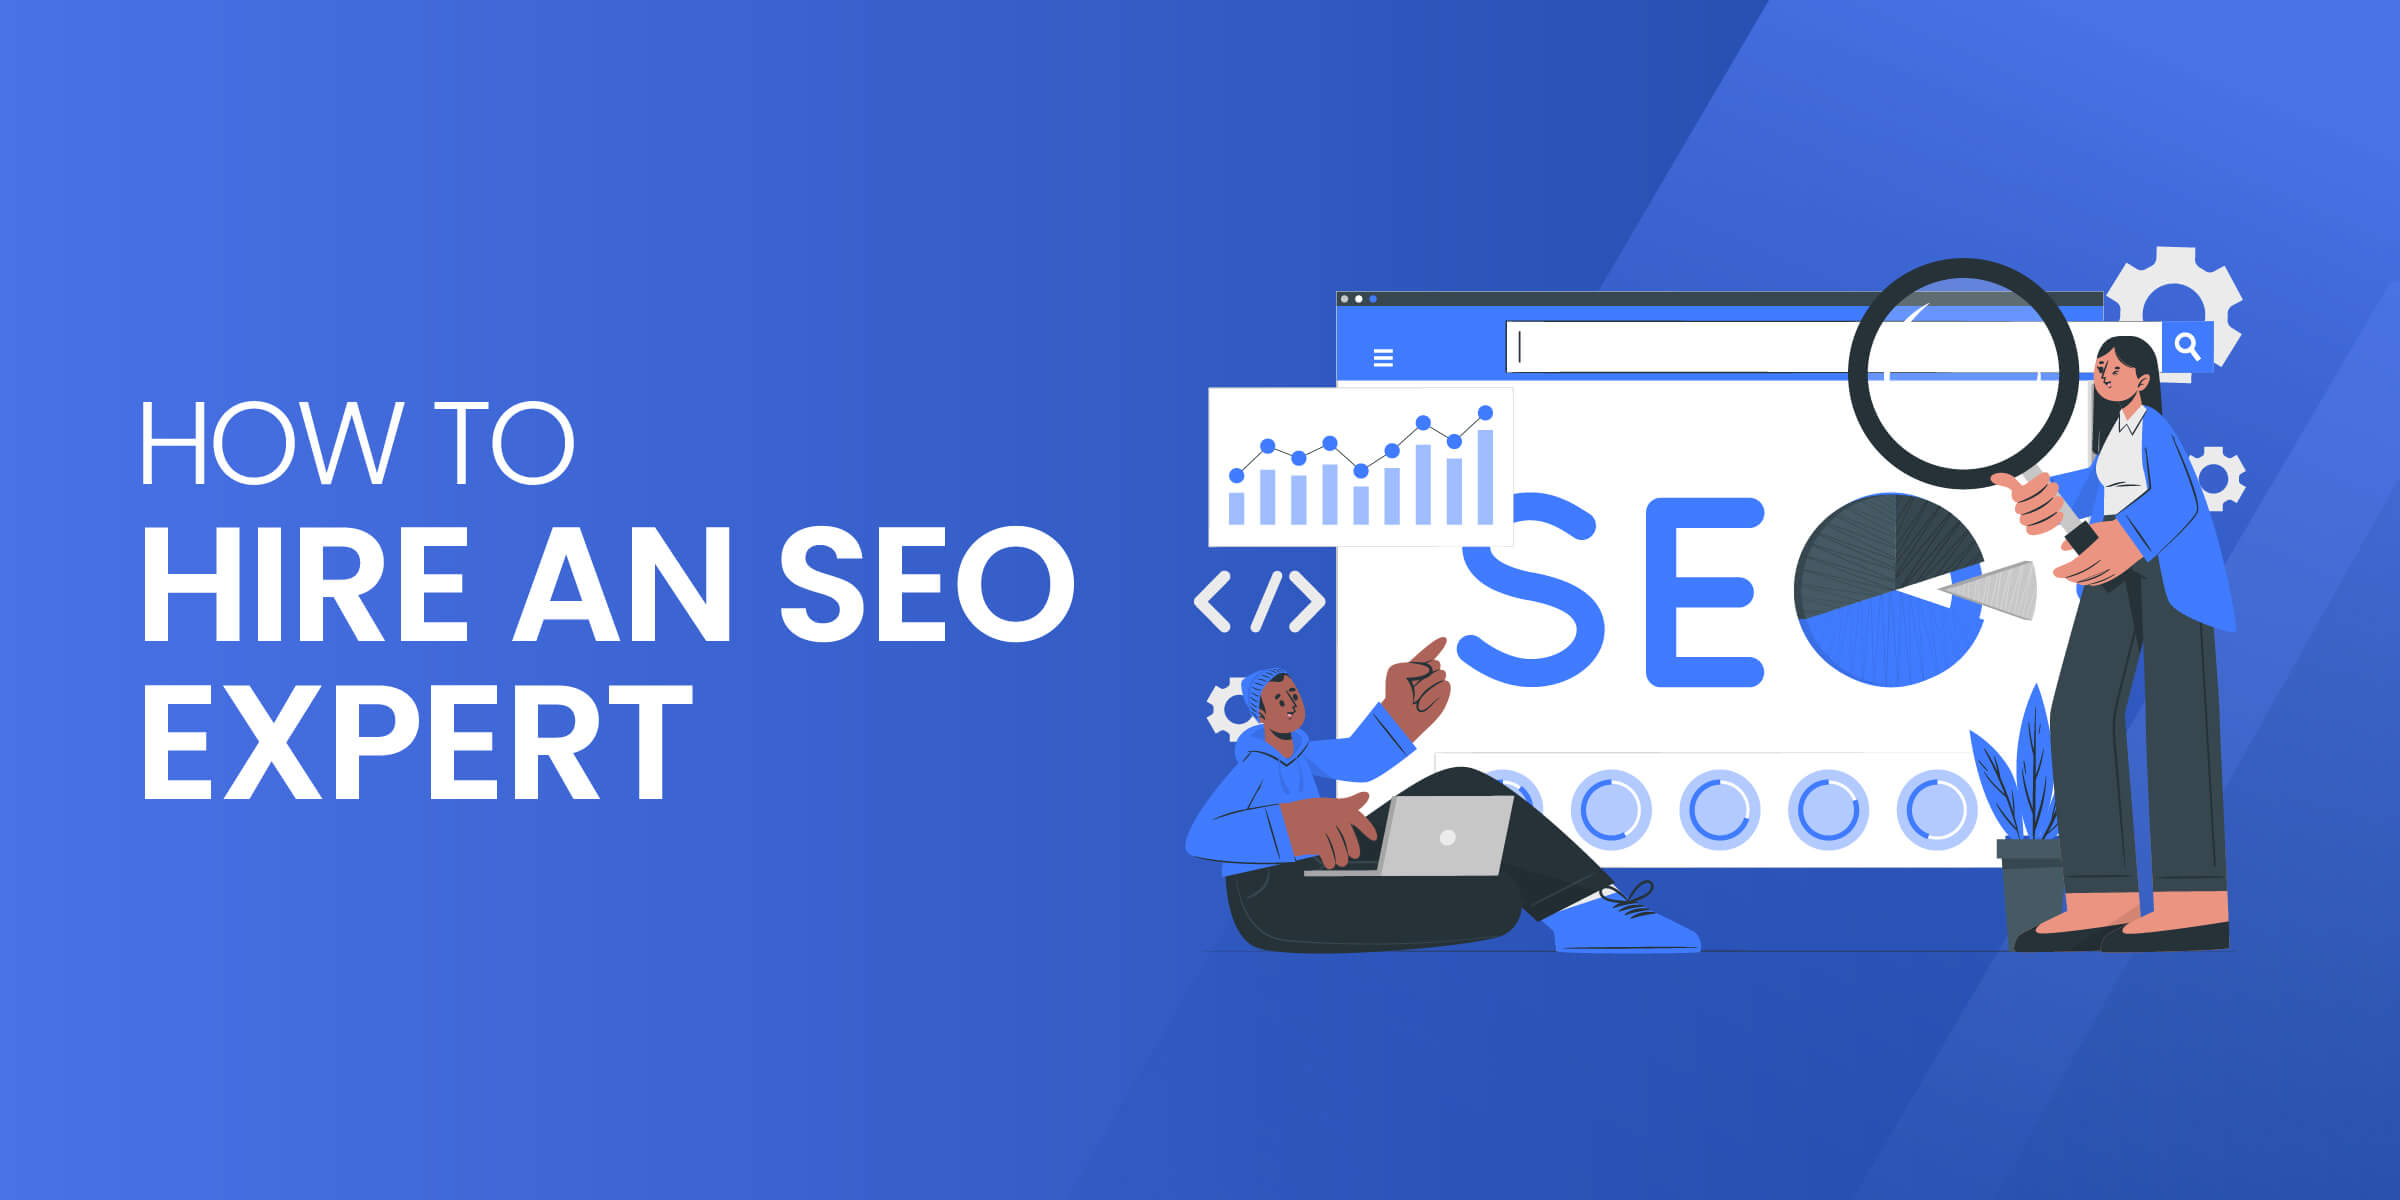 How to Hire an SEO Expert